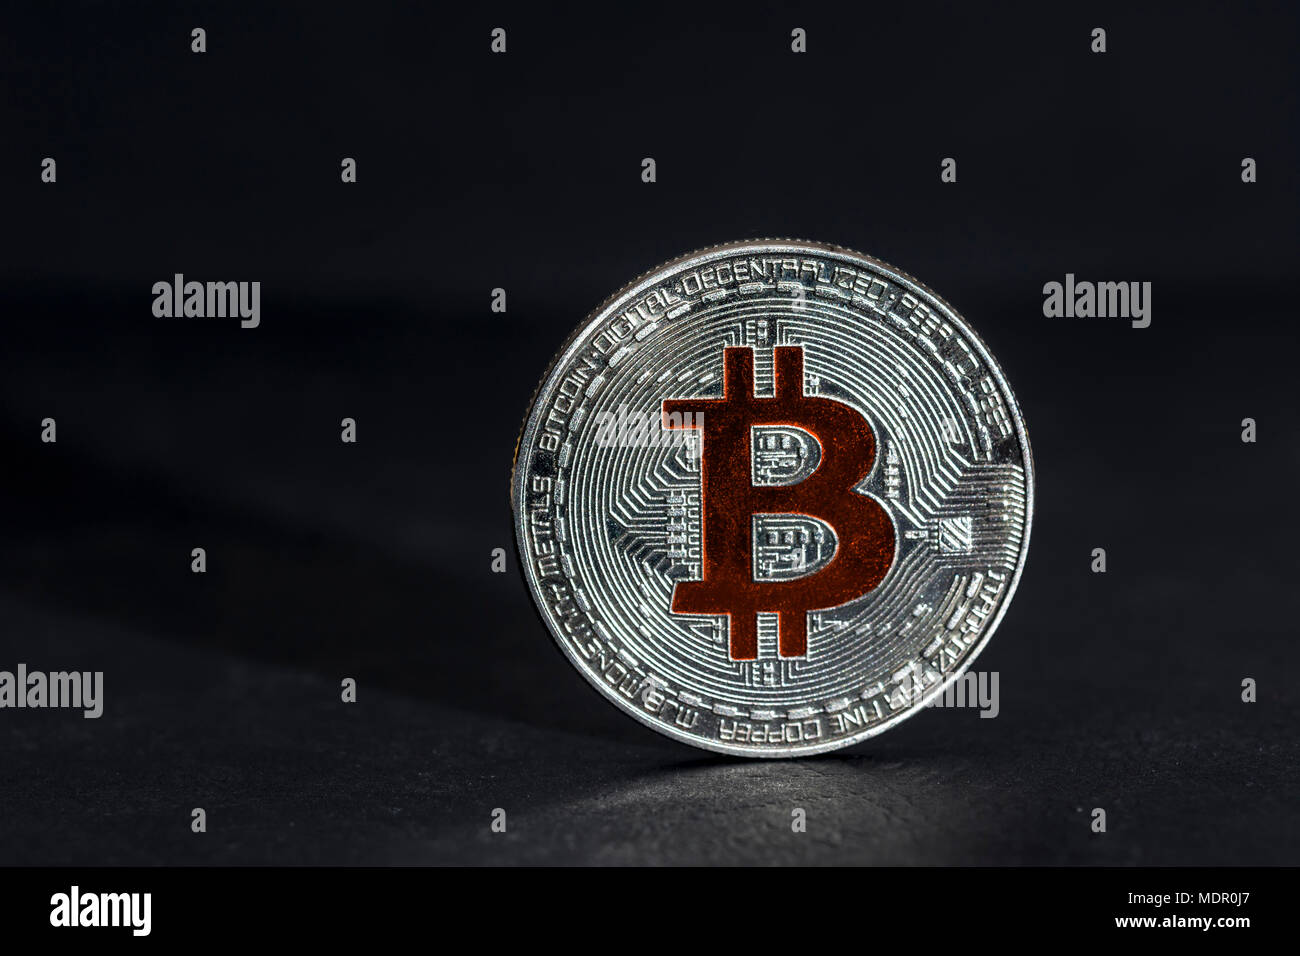 Close up of bitcoin, silver bitcoin, bitcoin with blurred background, digital currency, bitcoin mining, BTC modern currency exchange Stock Photo